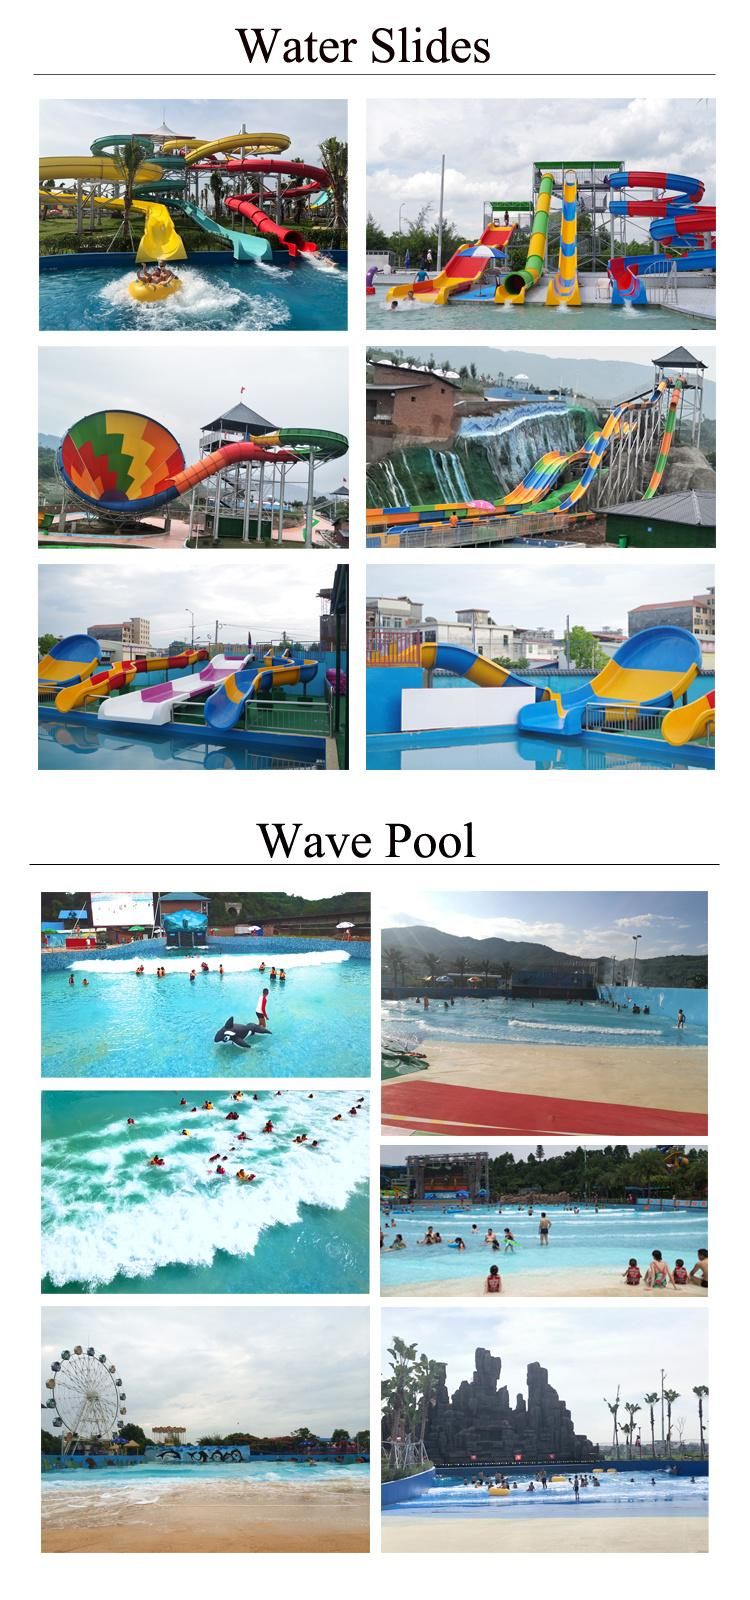 Whole Water Park Design by Professional Manufacturer